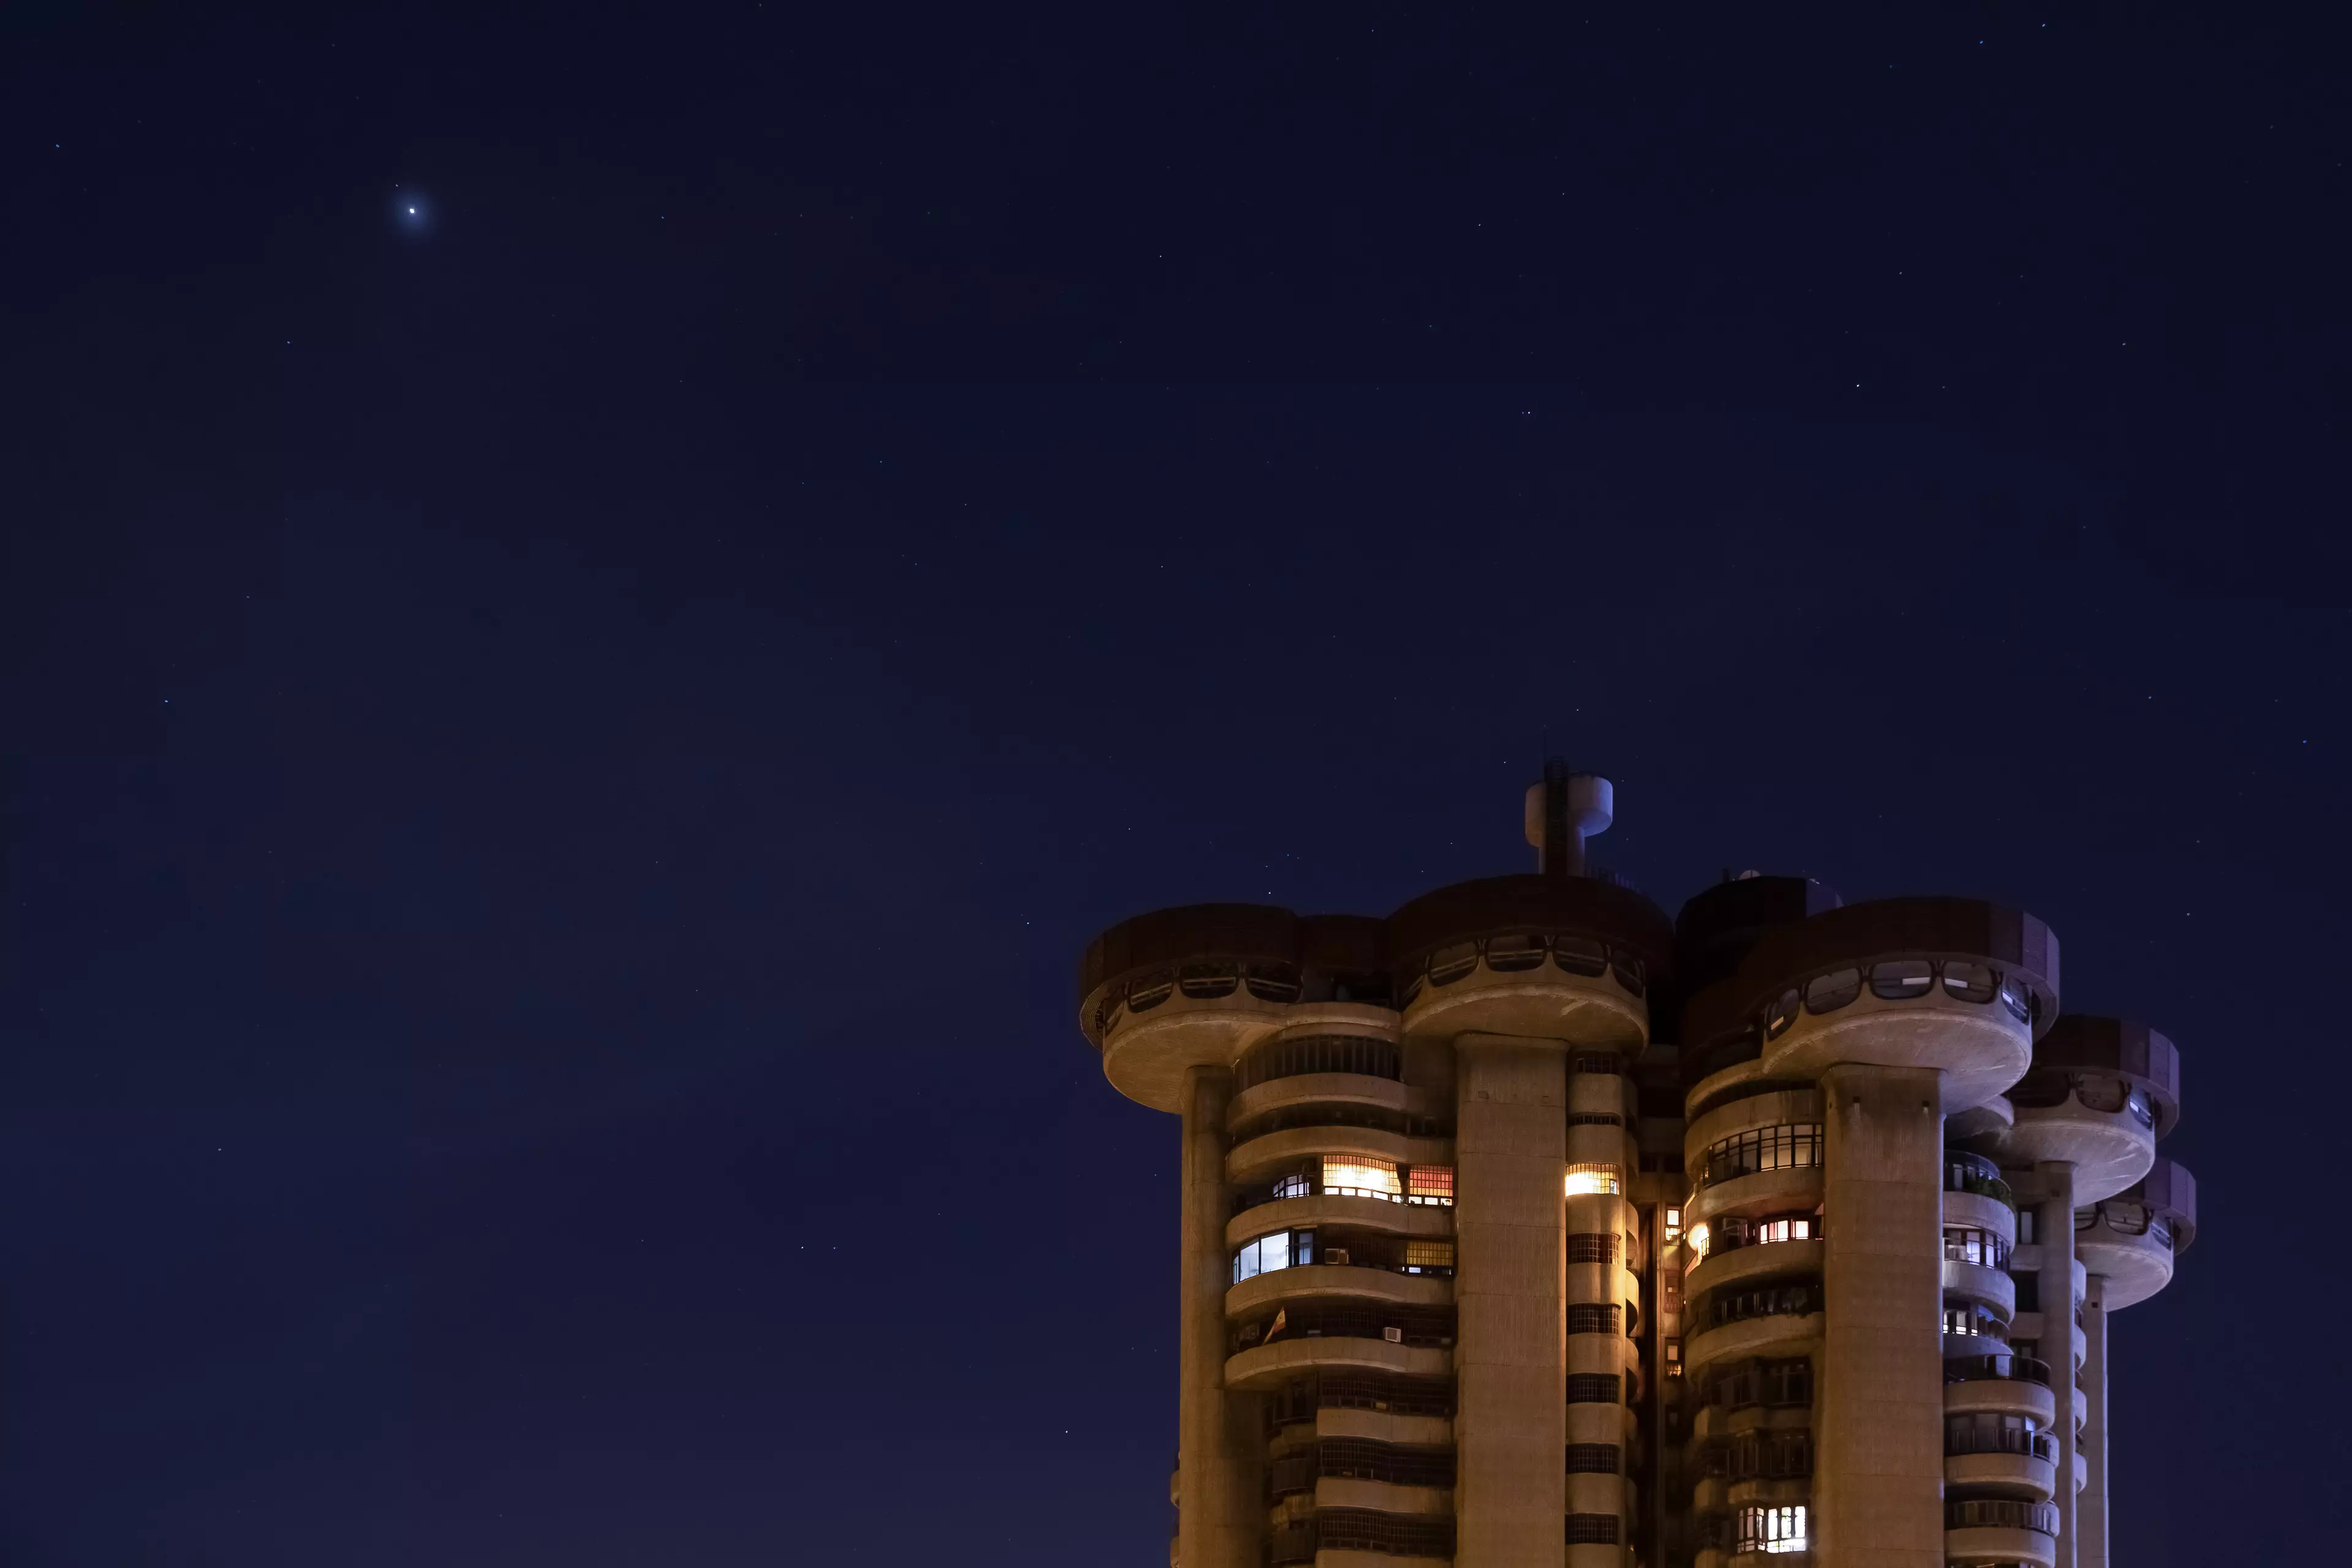 Mars visible in the night sky from Madrid last October.